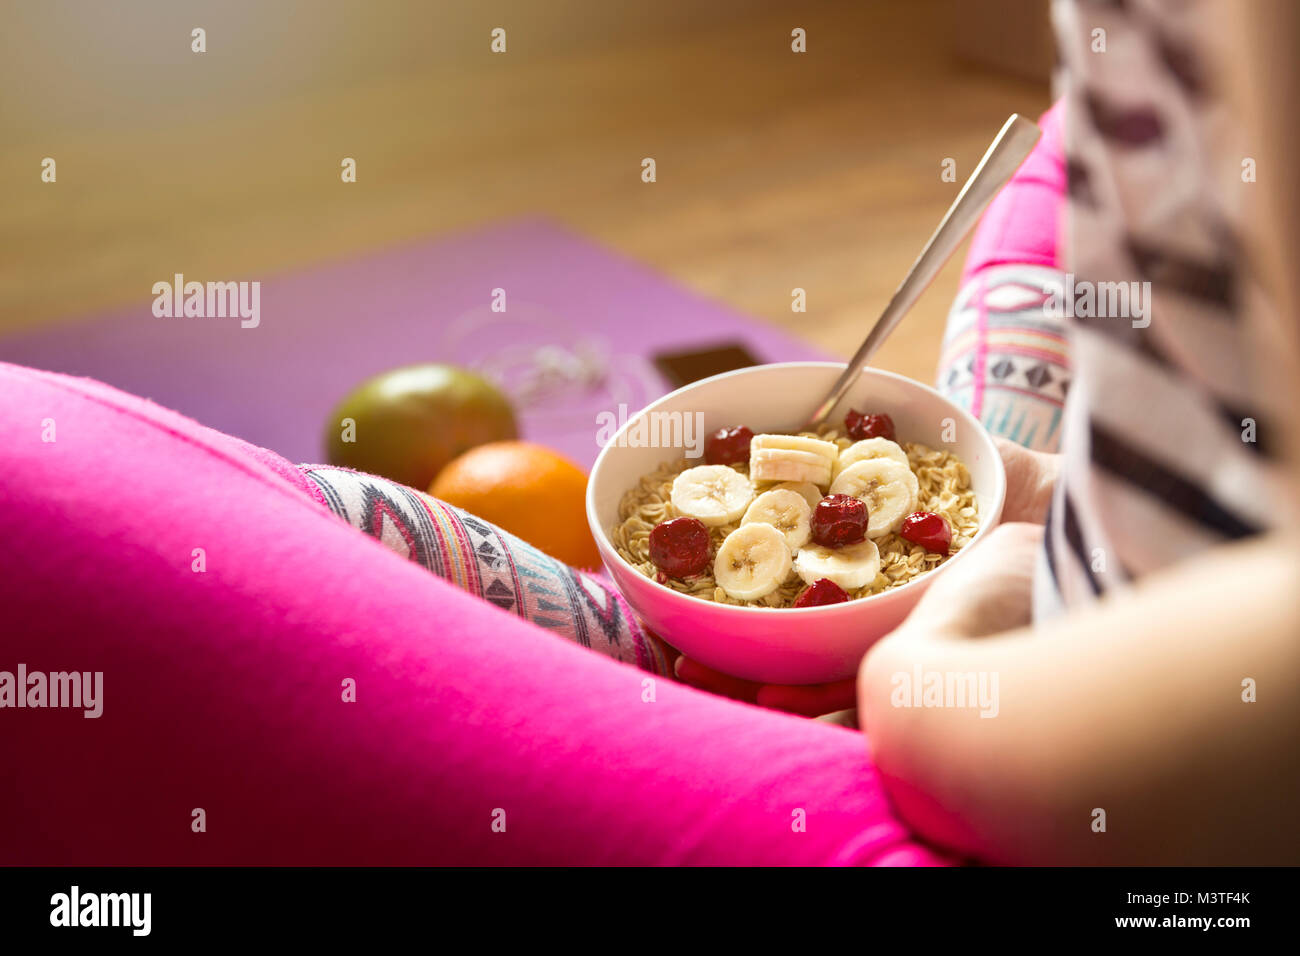 Young girl eating a oatmeal with berries after a workout . Fitness and healthy lifestyle concept. Stock Photo